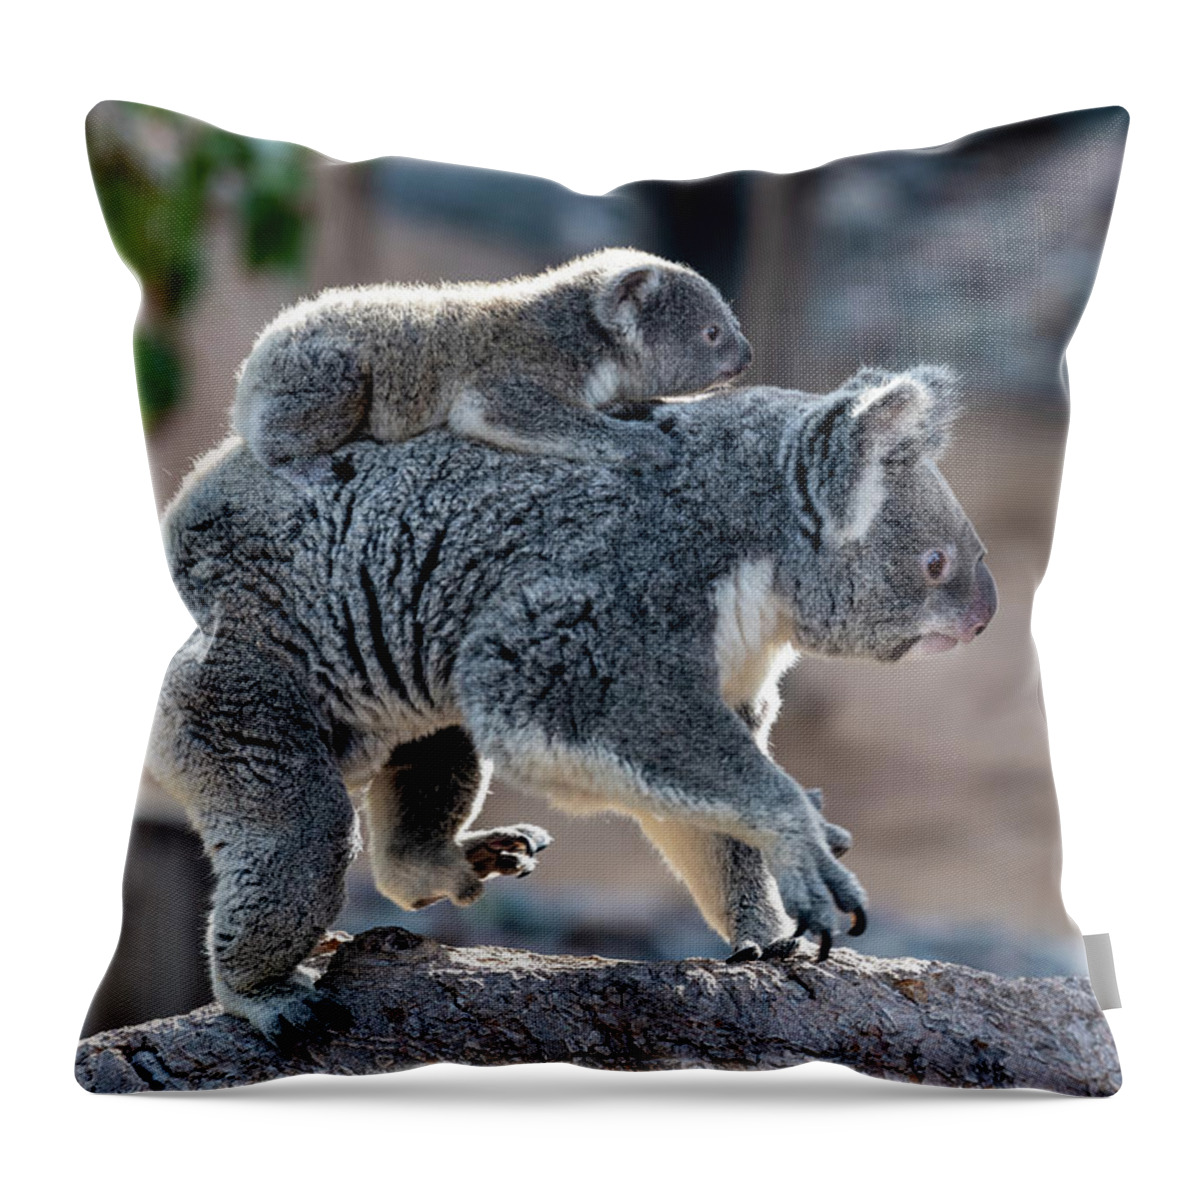 San Diego Zoo Throw Pillow featuring the photograph Piggy Back Rides by David Levin